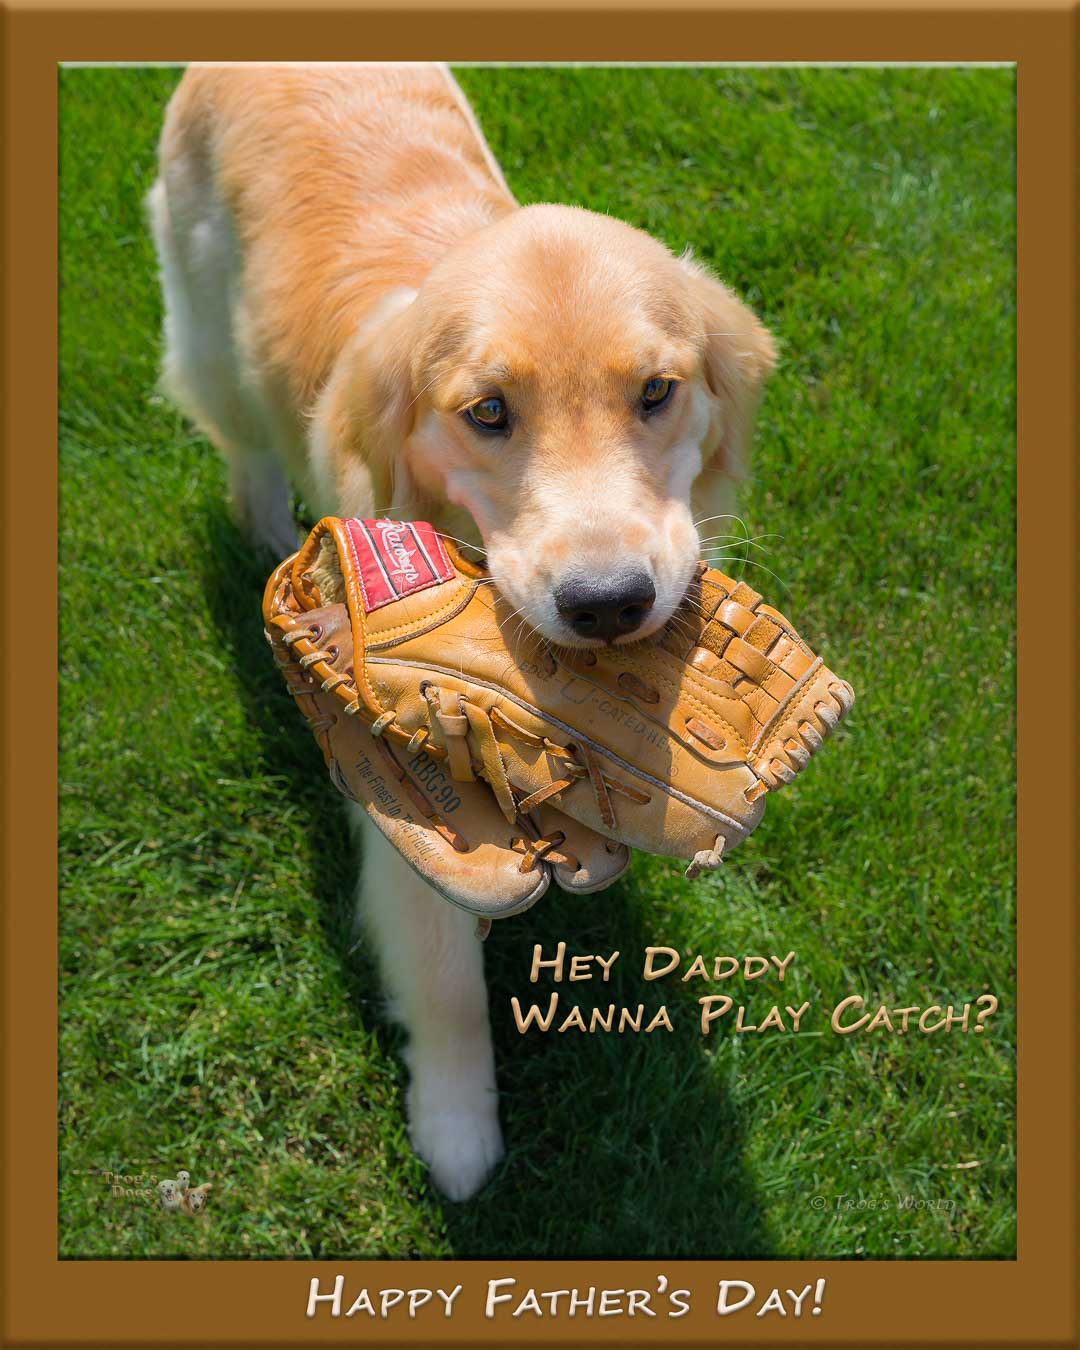 Golden Retriever with a glove in its mouth